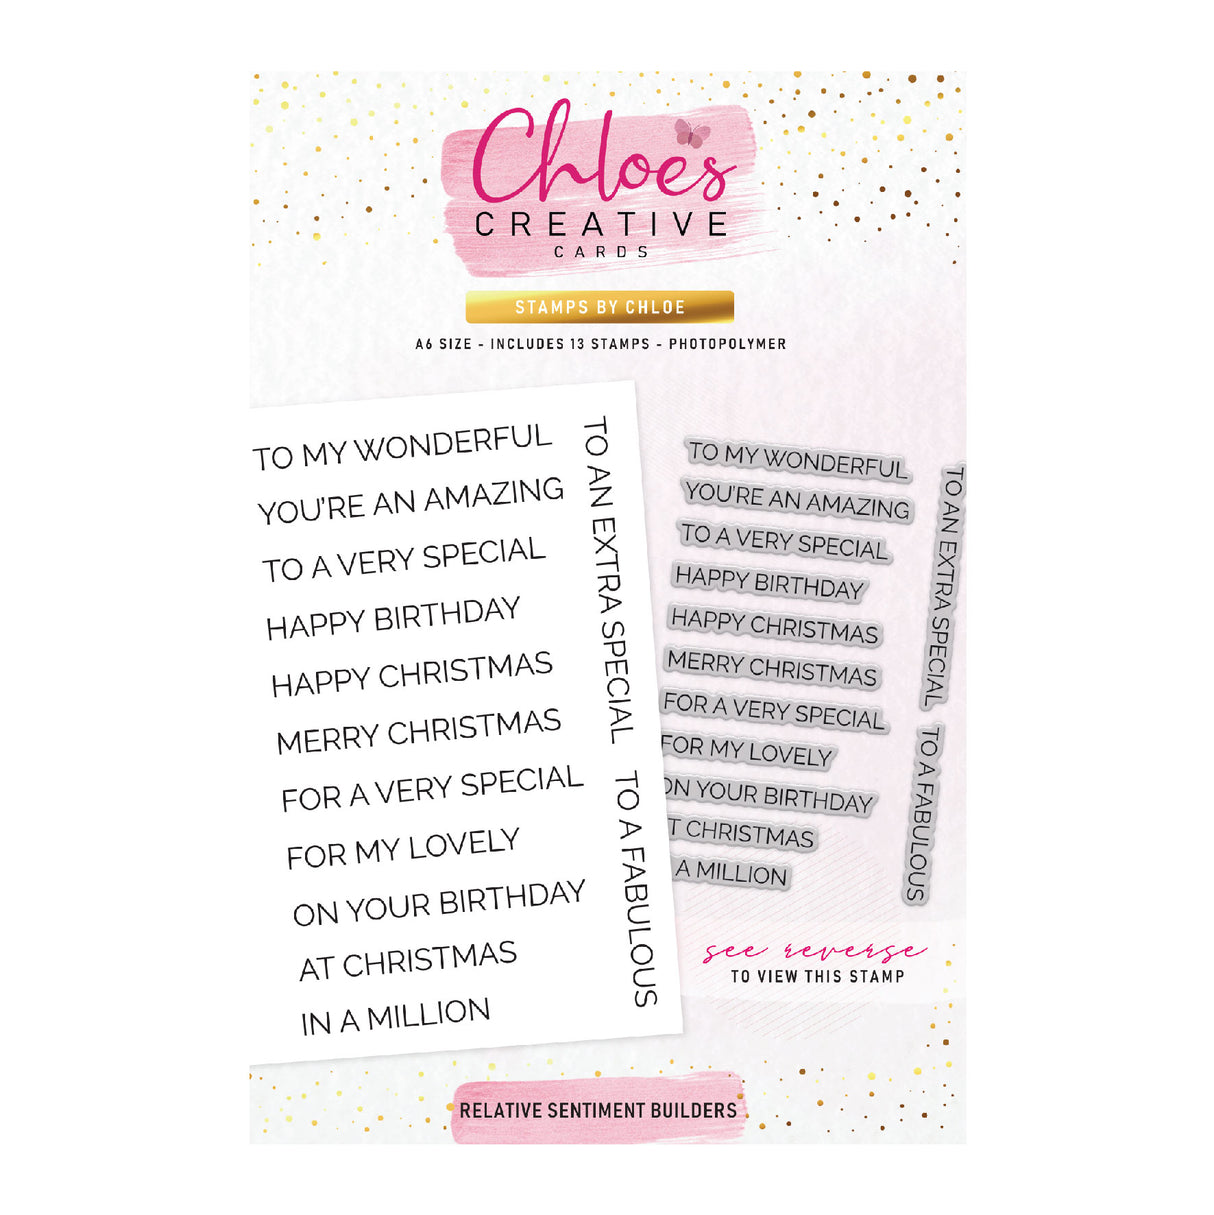 Chloes Creative Cards Photopolymer Stamp Set (A6) - Relative Sentiment Builders